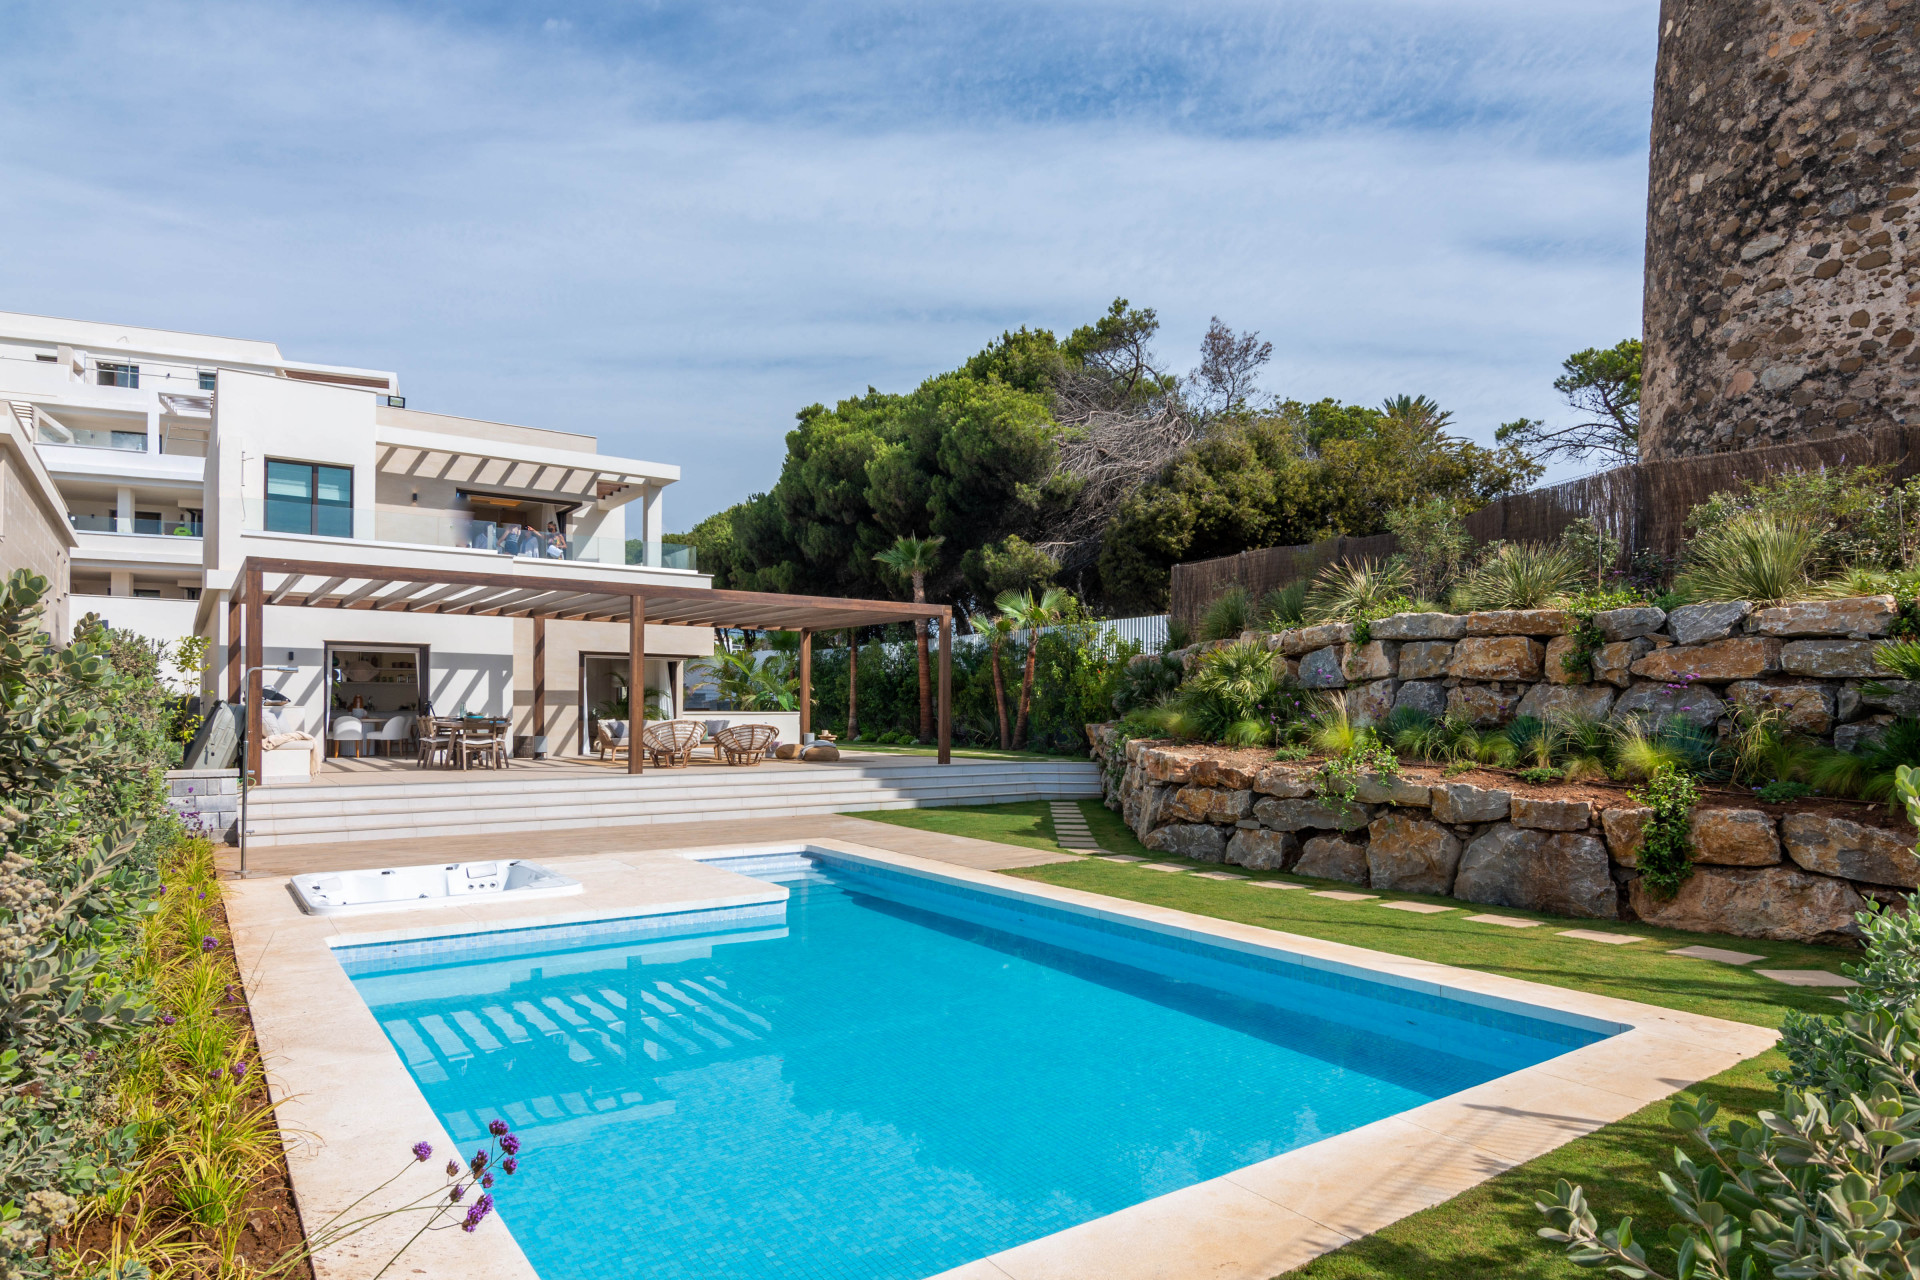 Exclusive frontline beach complex on the New Golden Mile, within 10-12 min drive from the famous Puerto Banús